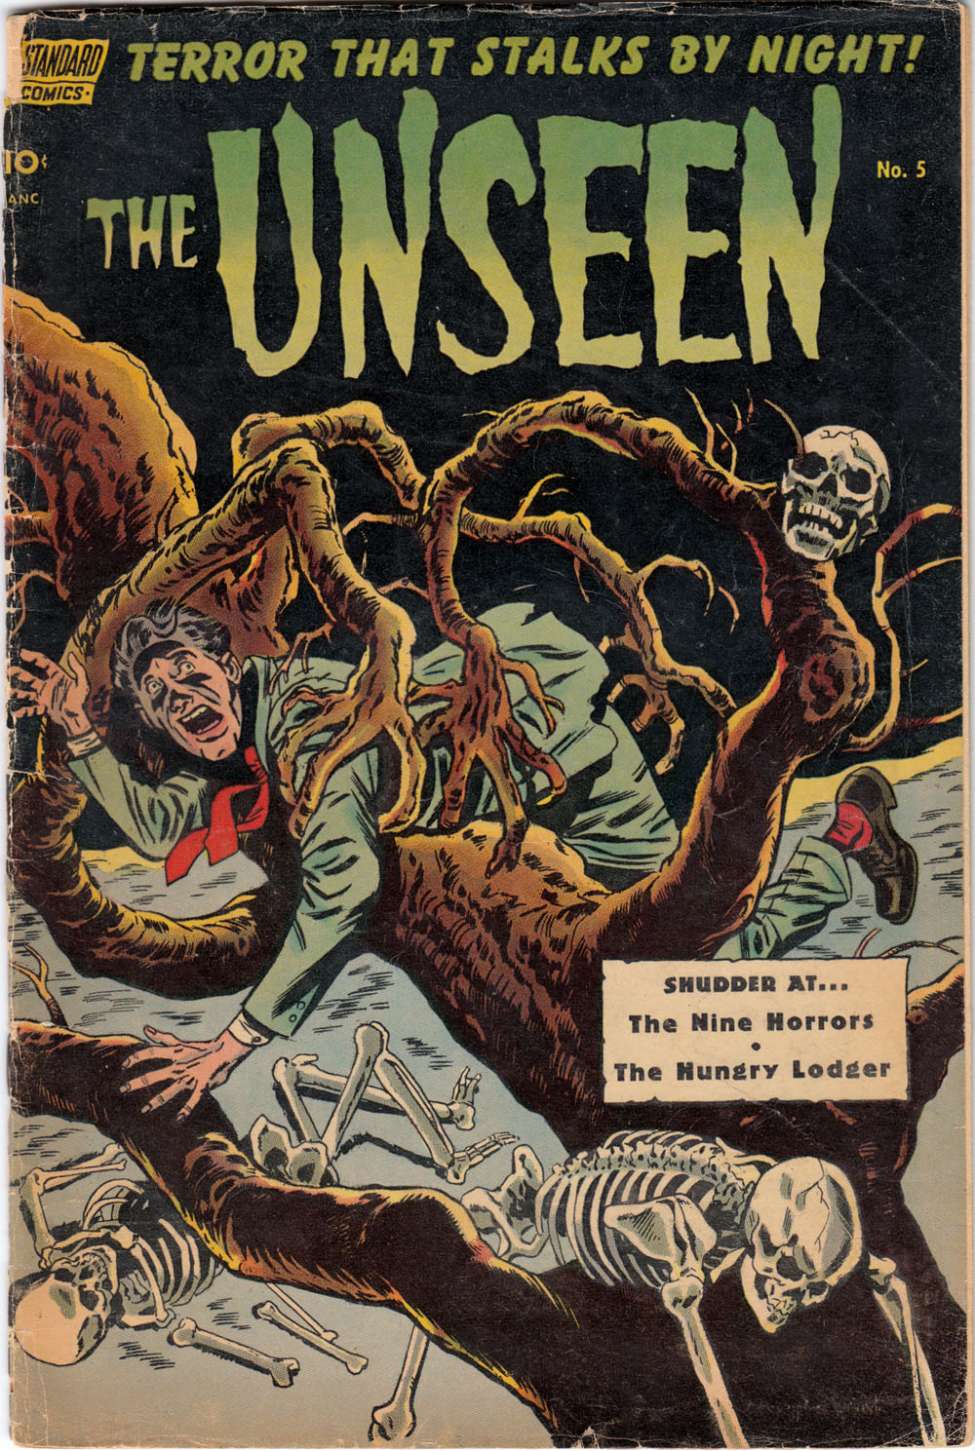 Book Cover For The Unseen 5 (alt) - Version 2